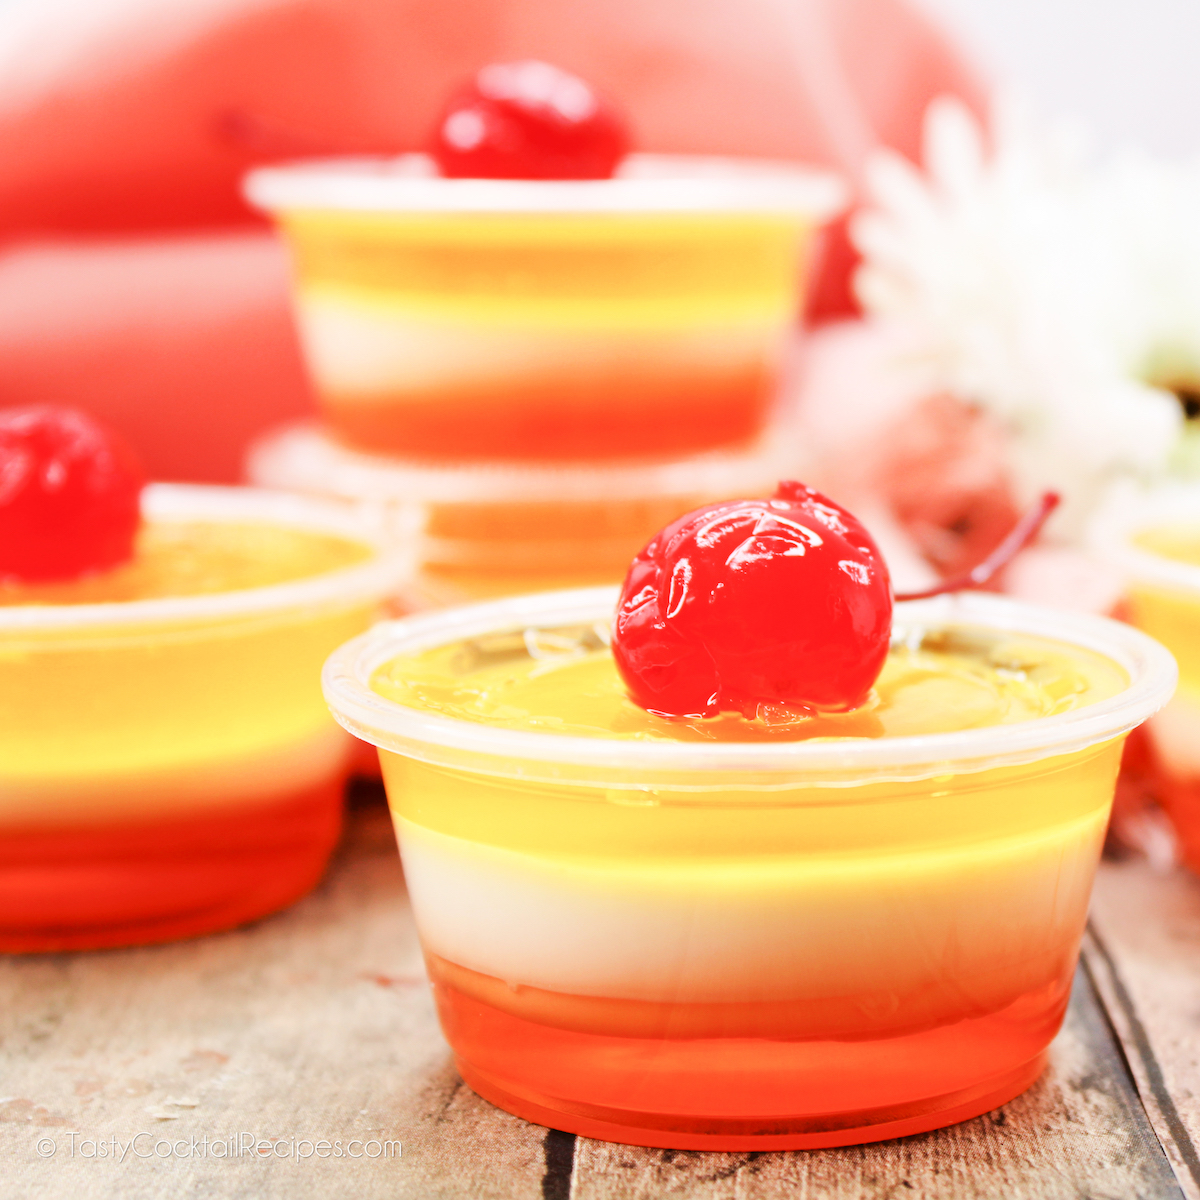 Piña Colada Jello Shots, colored like a sunset, with a cherry on top